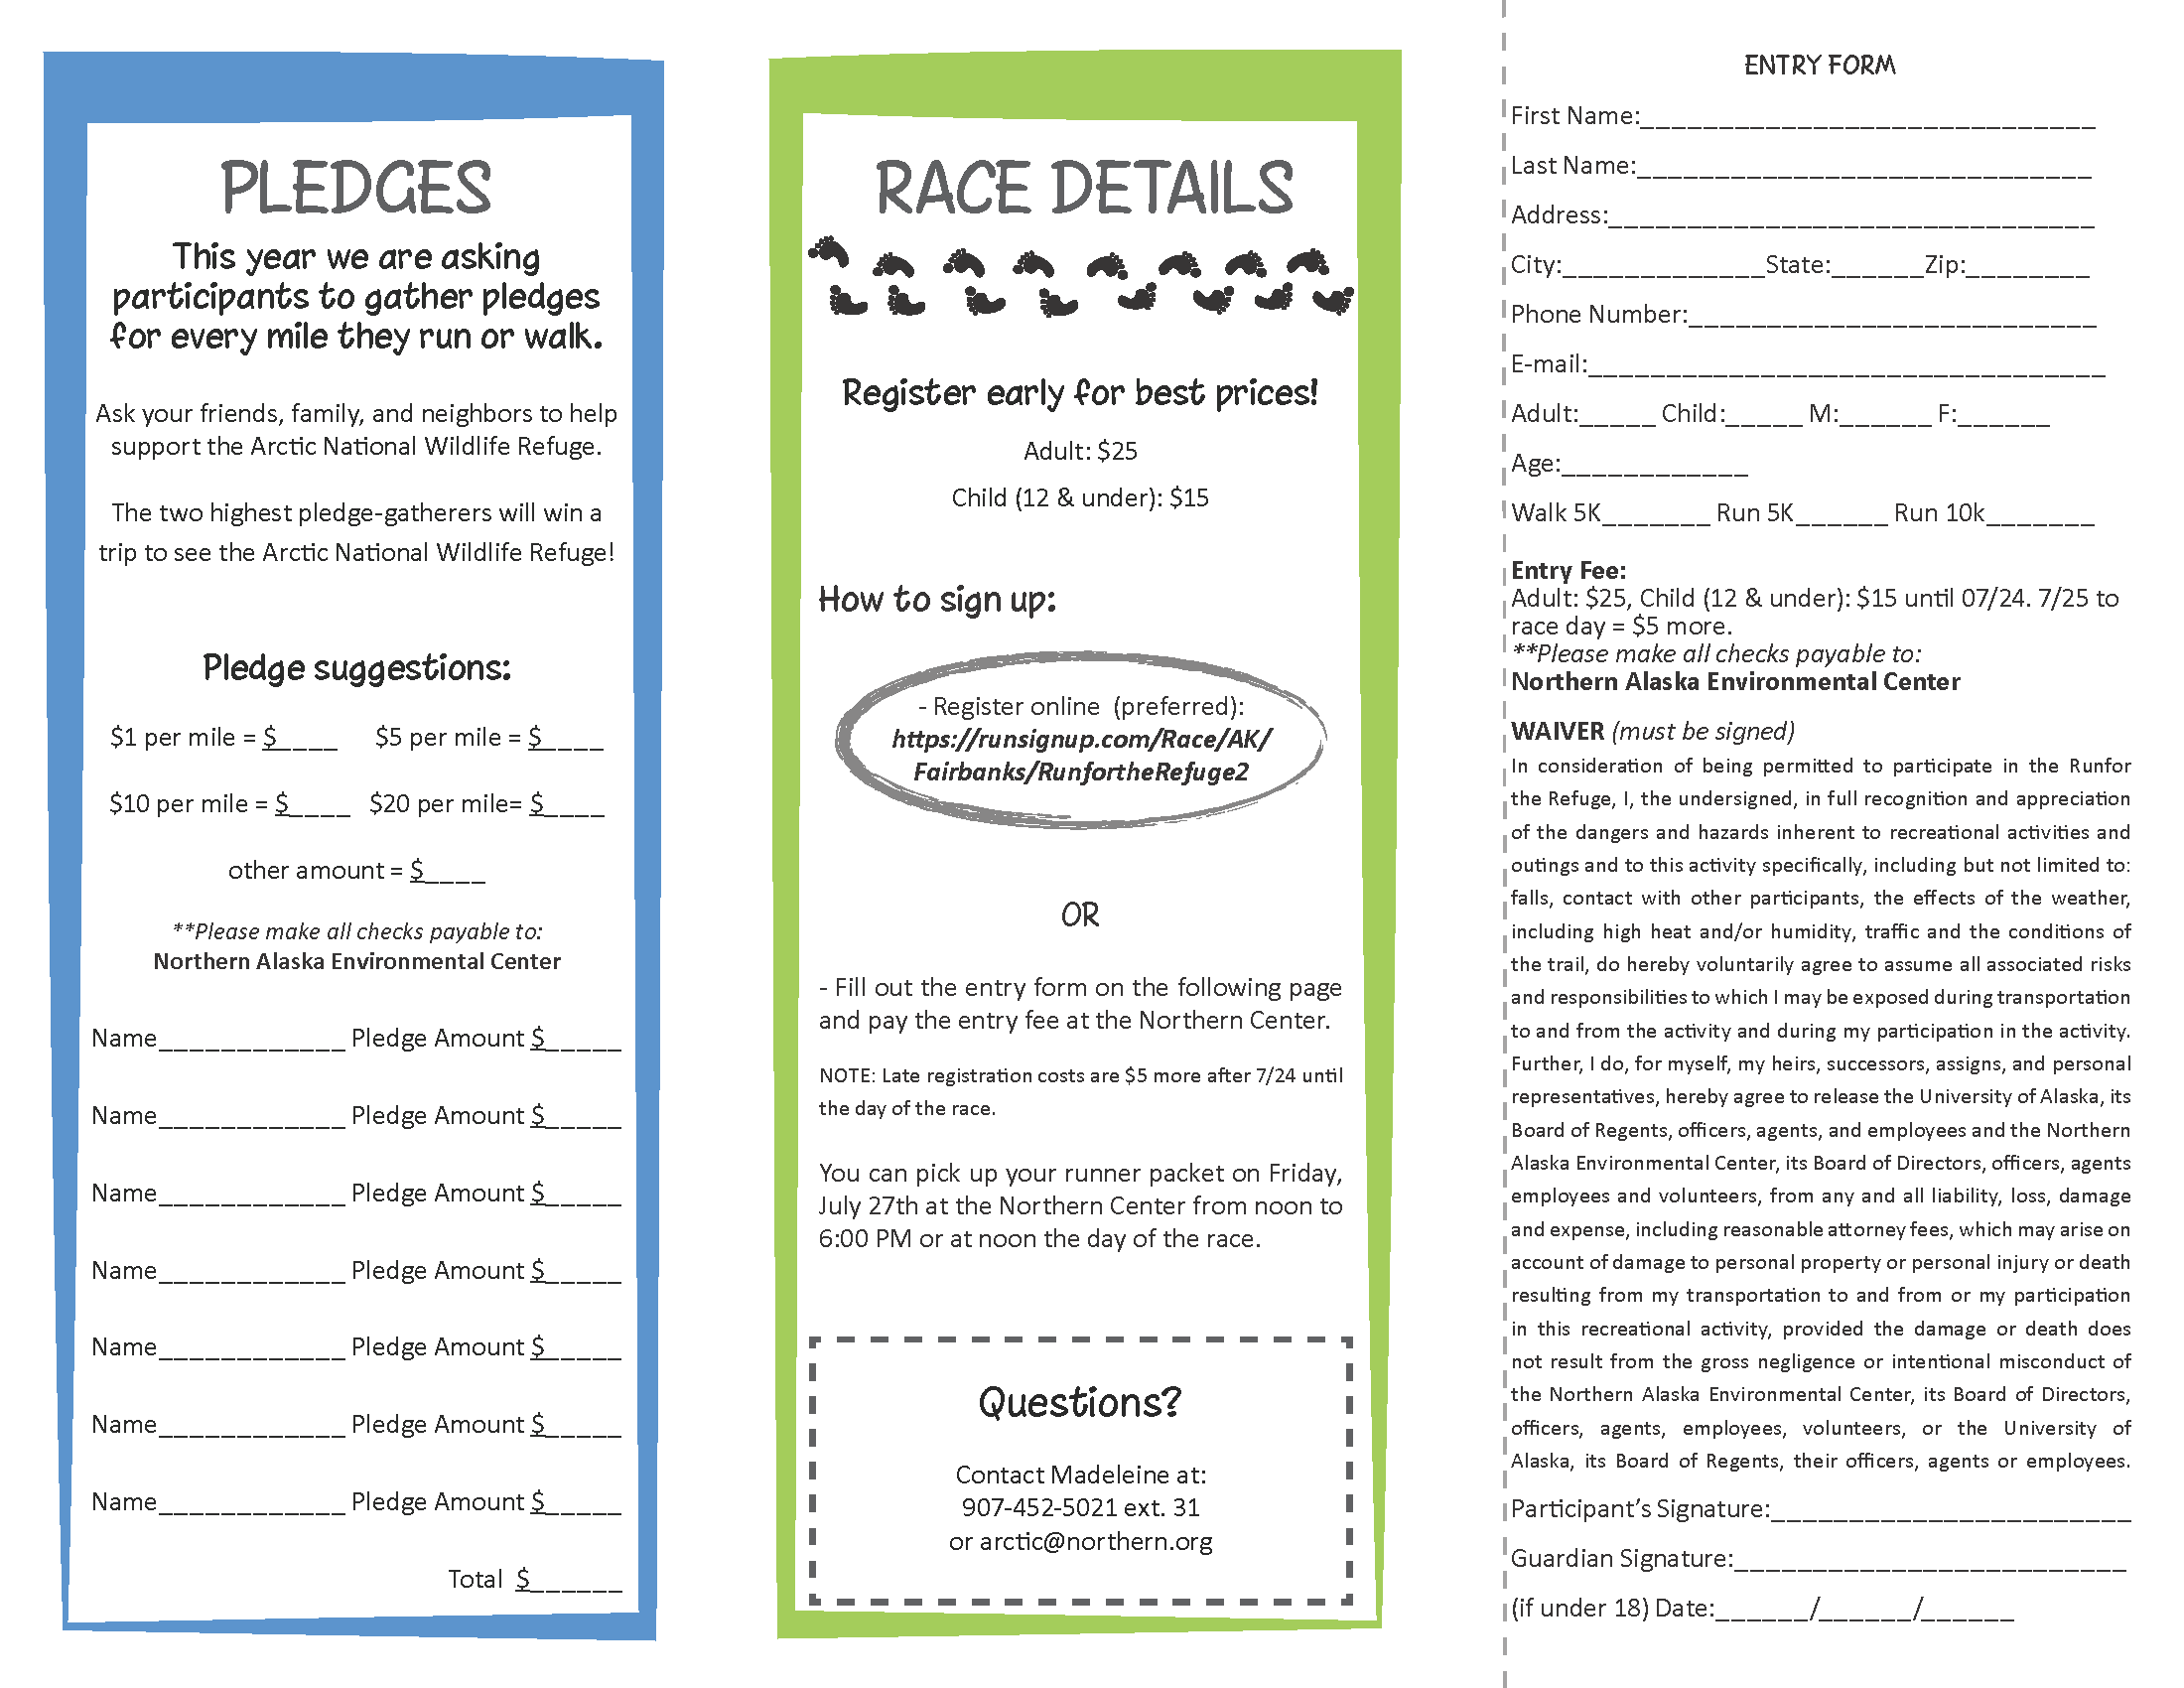  Run for the Refuge trifold brochure 